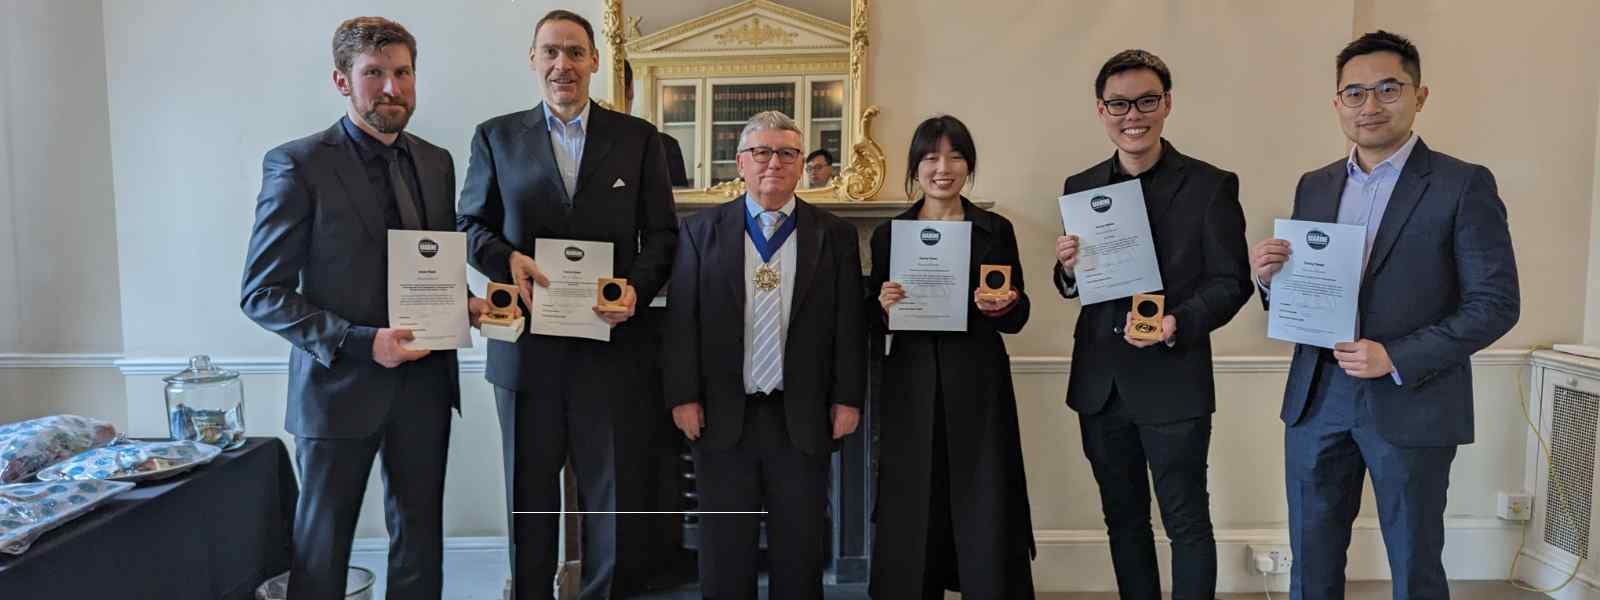 Strathclyde's Professor Gerasimos Theotokatos (second left) with other IMarEST award winnners receiving their medals and certificates from  IMarEST President Martin Shaw (third left). Photo courtesy of IMarEST